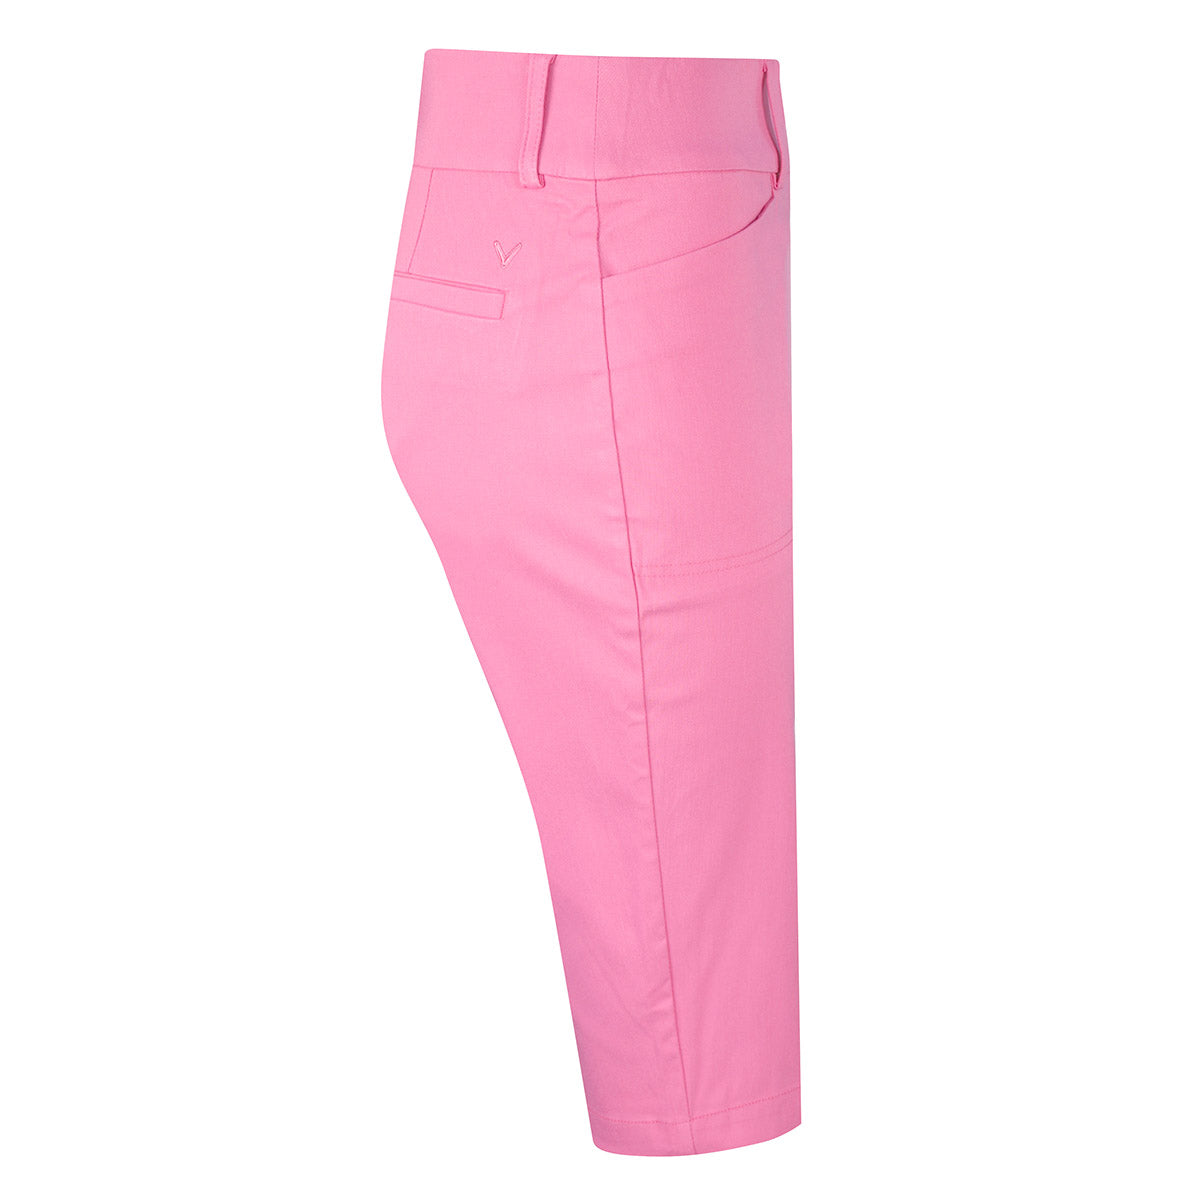 Callaway Ladies Pull-On City Golf Short in Pink Sunset - XS Only Left